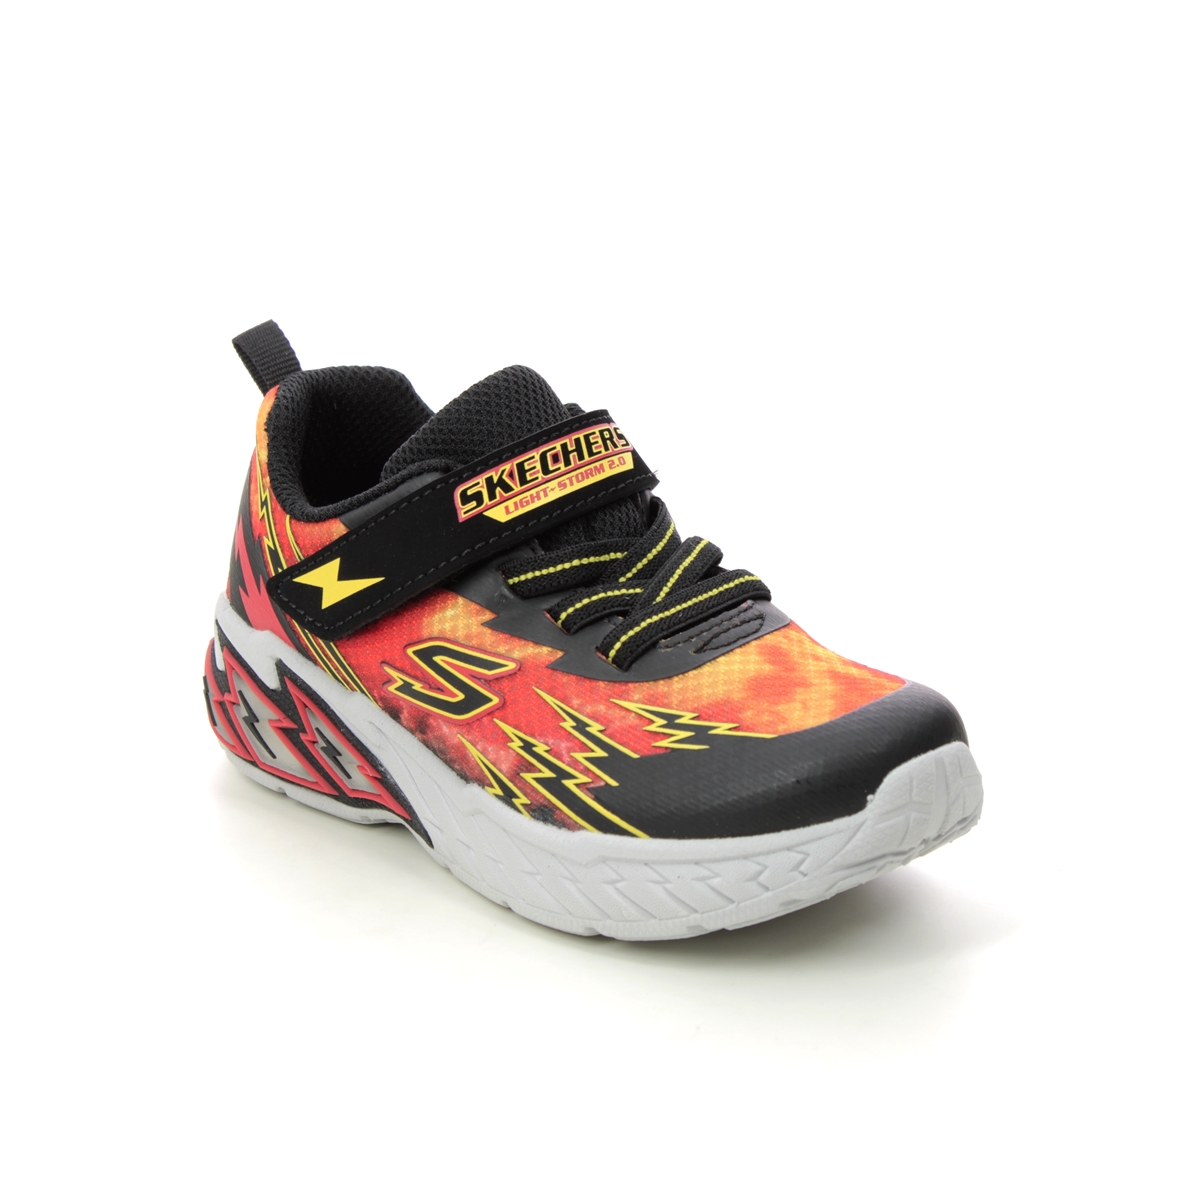 Skechers Light Storm Inf Black Red Kids Trainers 400150N In Size 24 In Plain Black Red